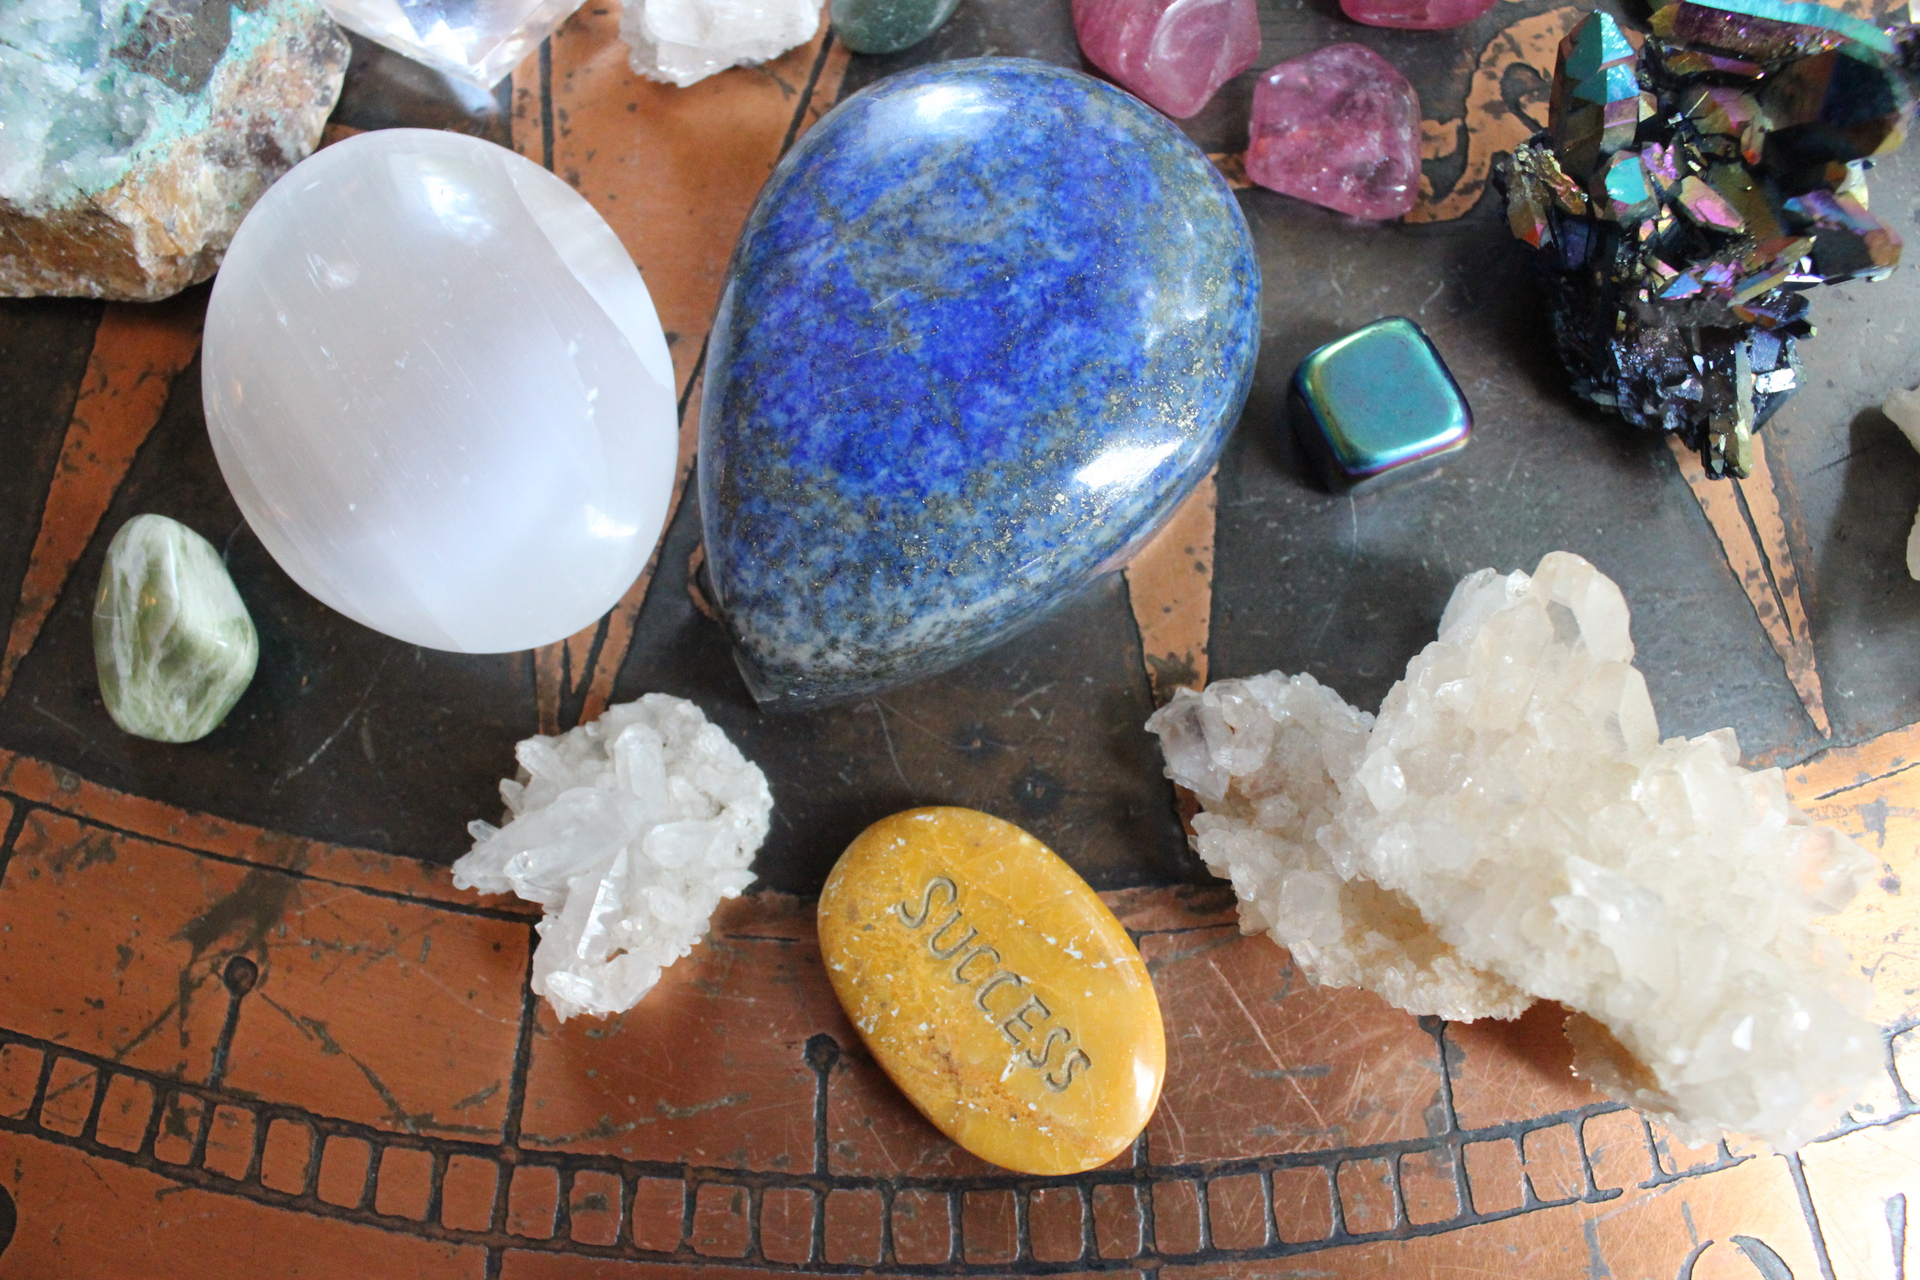 Gemstone Collection with Amazing Large Lapis Lazuli Stone, Aura Crystal Cluster, Blue Calcite, Selenite, "Success" Stone and More!